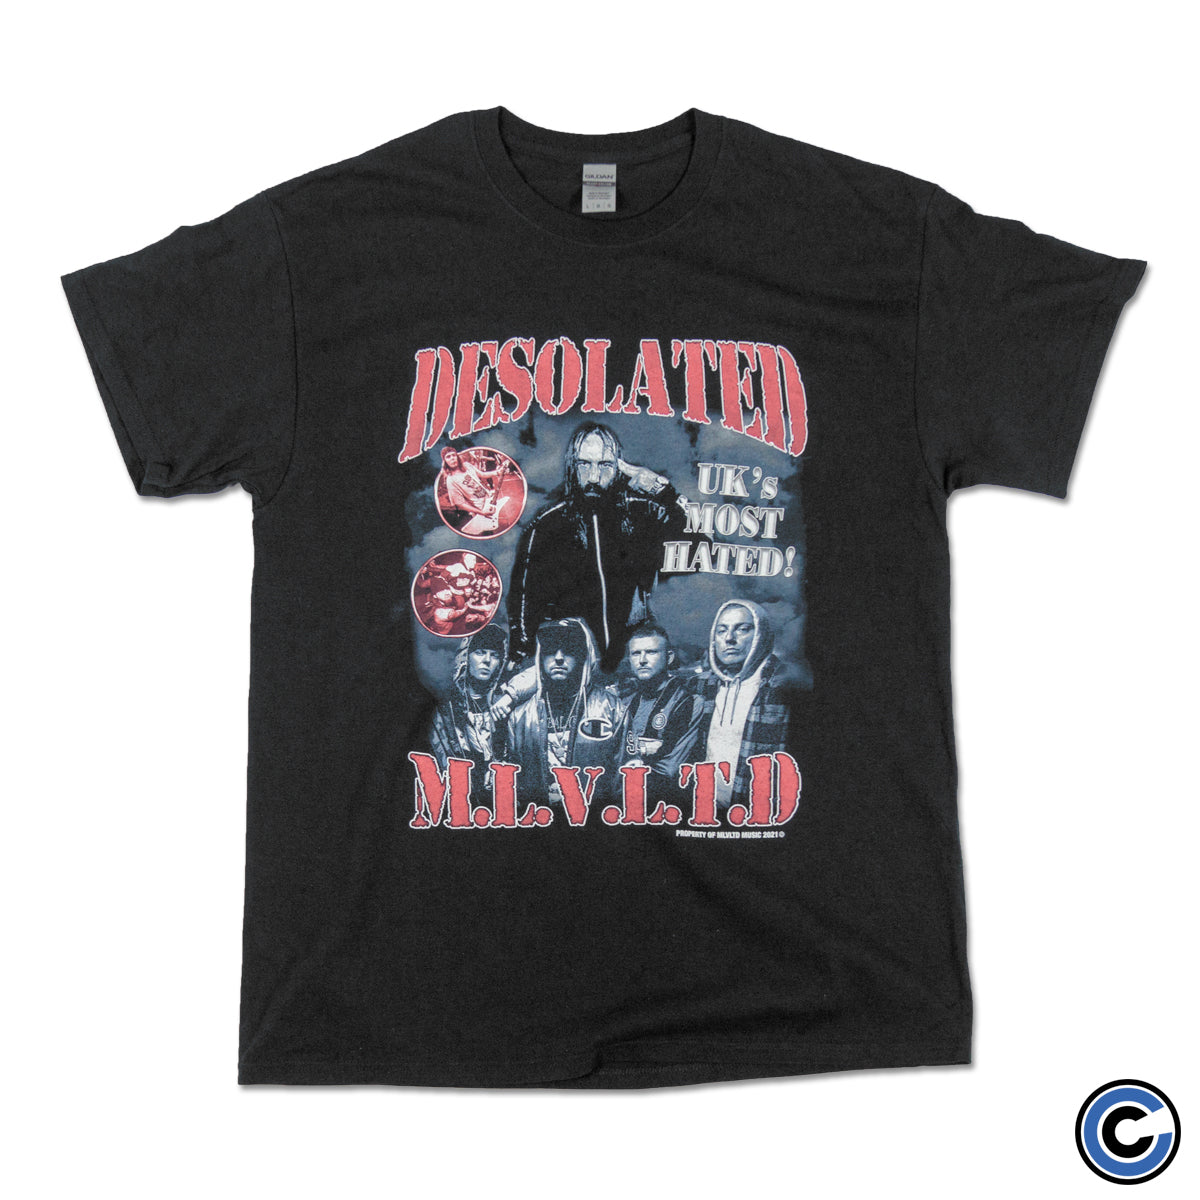 Desolated "UK's Most Hated" Shirt